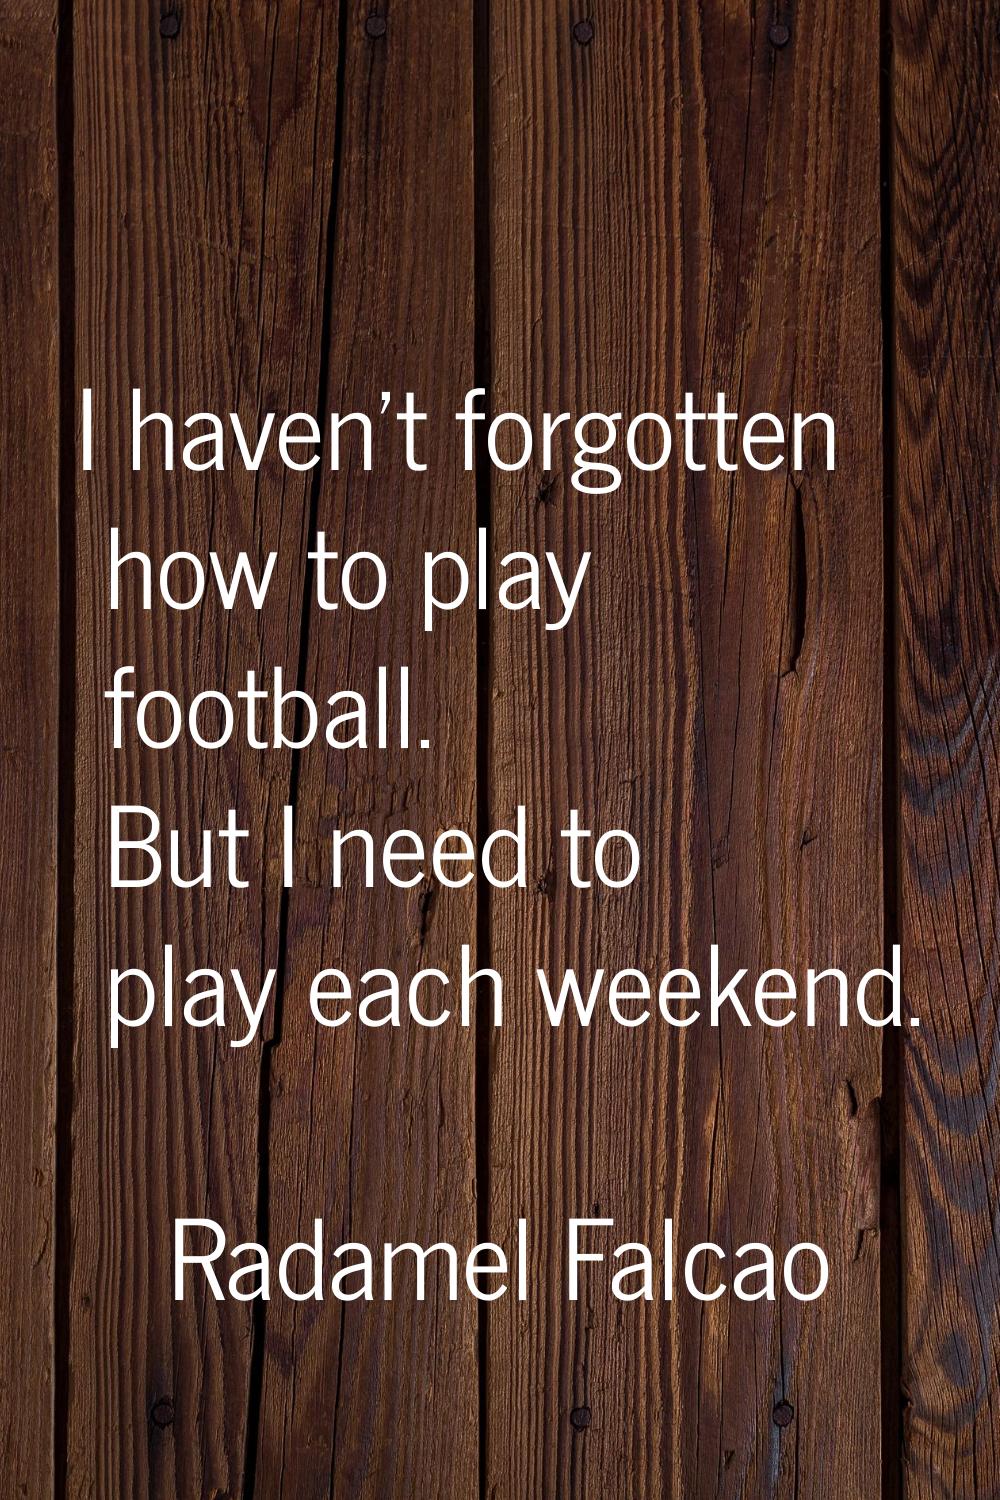 I haven't forgotten how to play football. But I need to play each weekend.